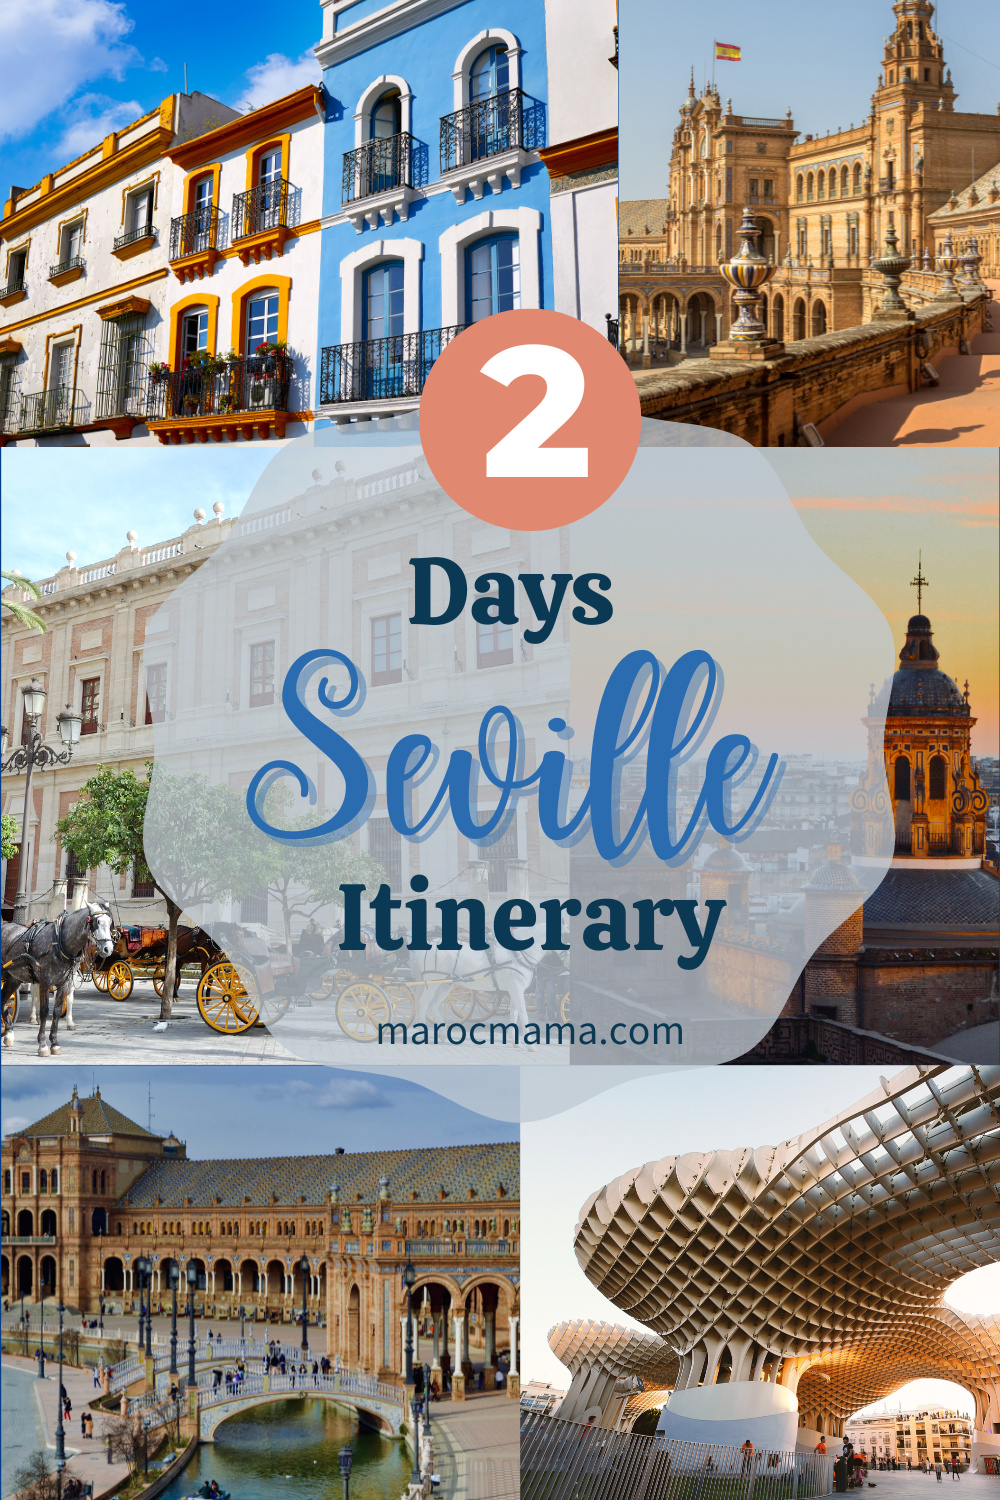 different places that you can visit during a 2 days in Seville itinerary